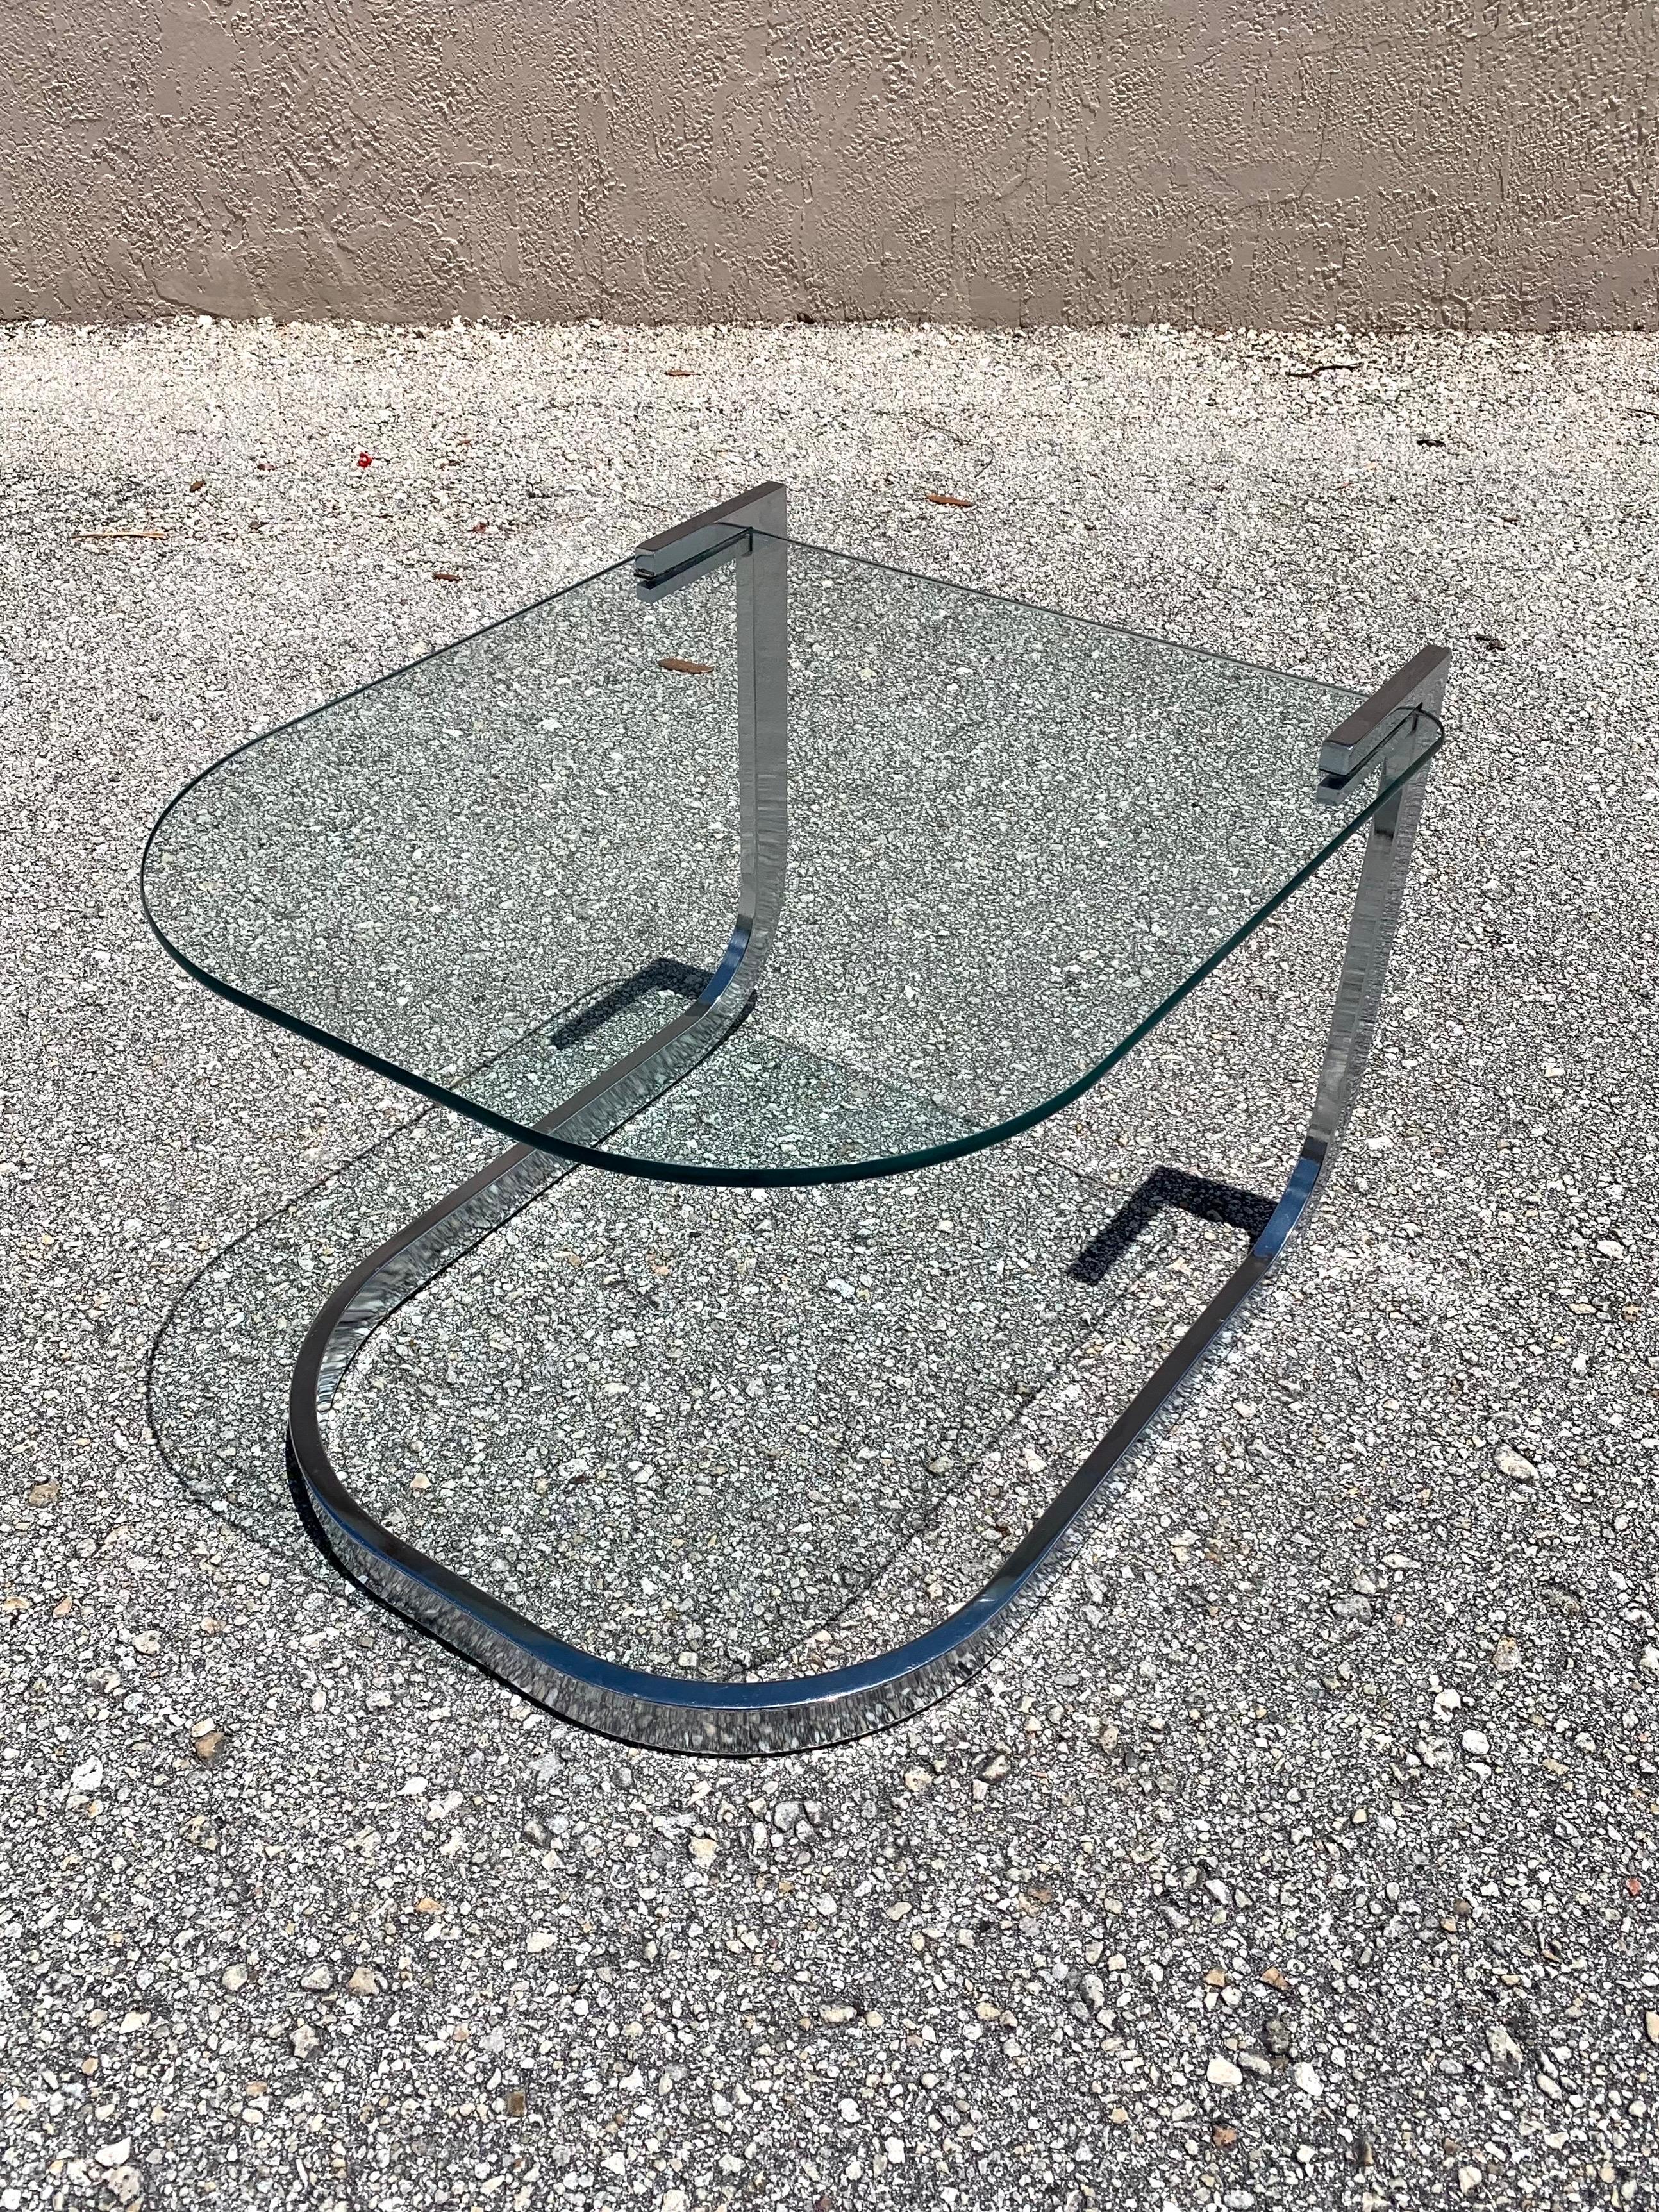 American Mid-Century Modern Design Institute of America Chrome and Glass Nesting Tables For Sale